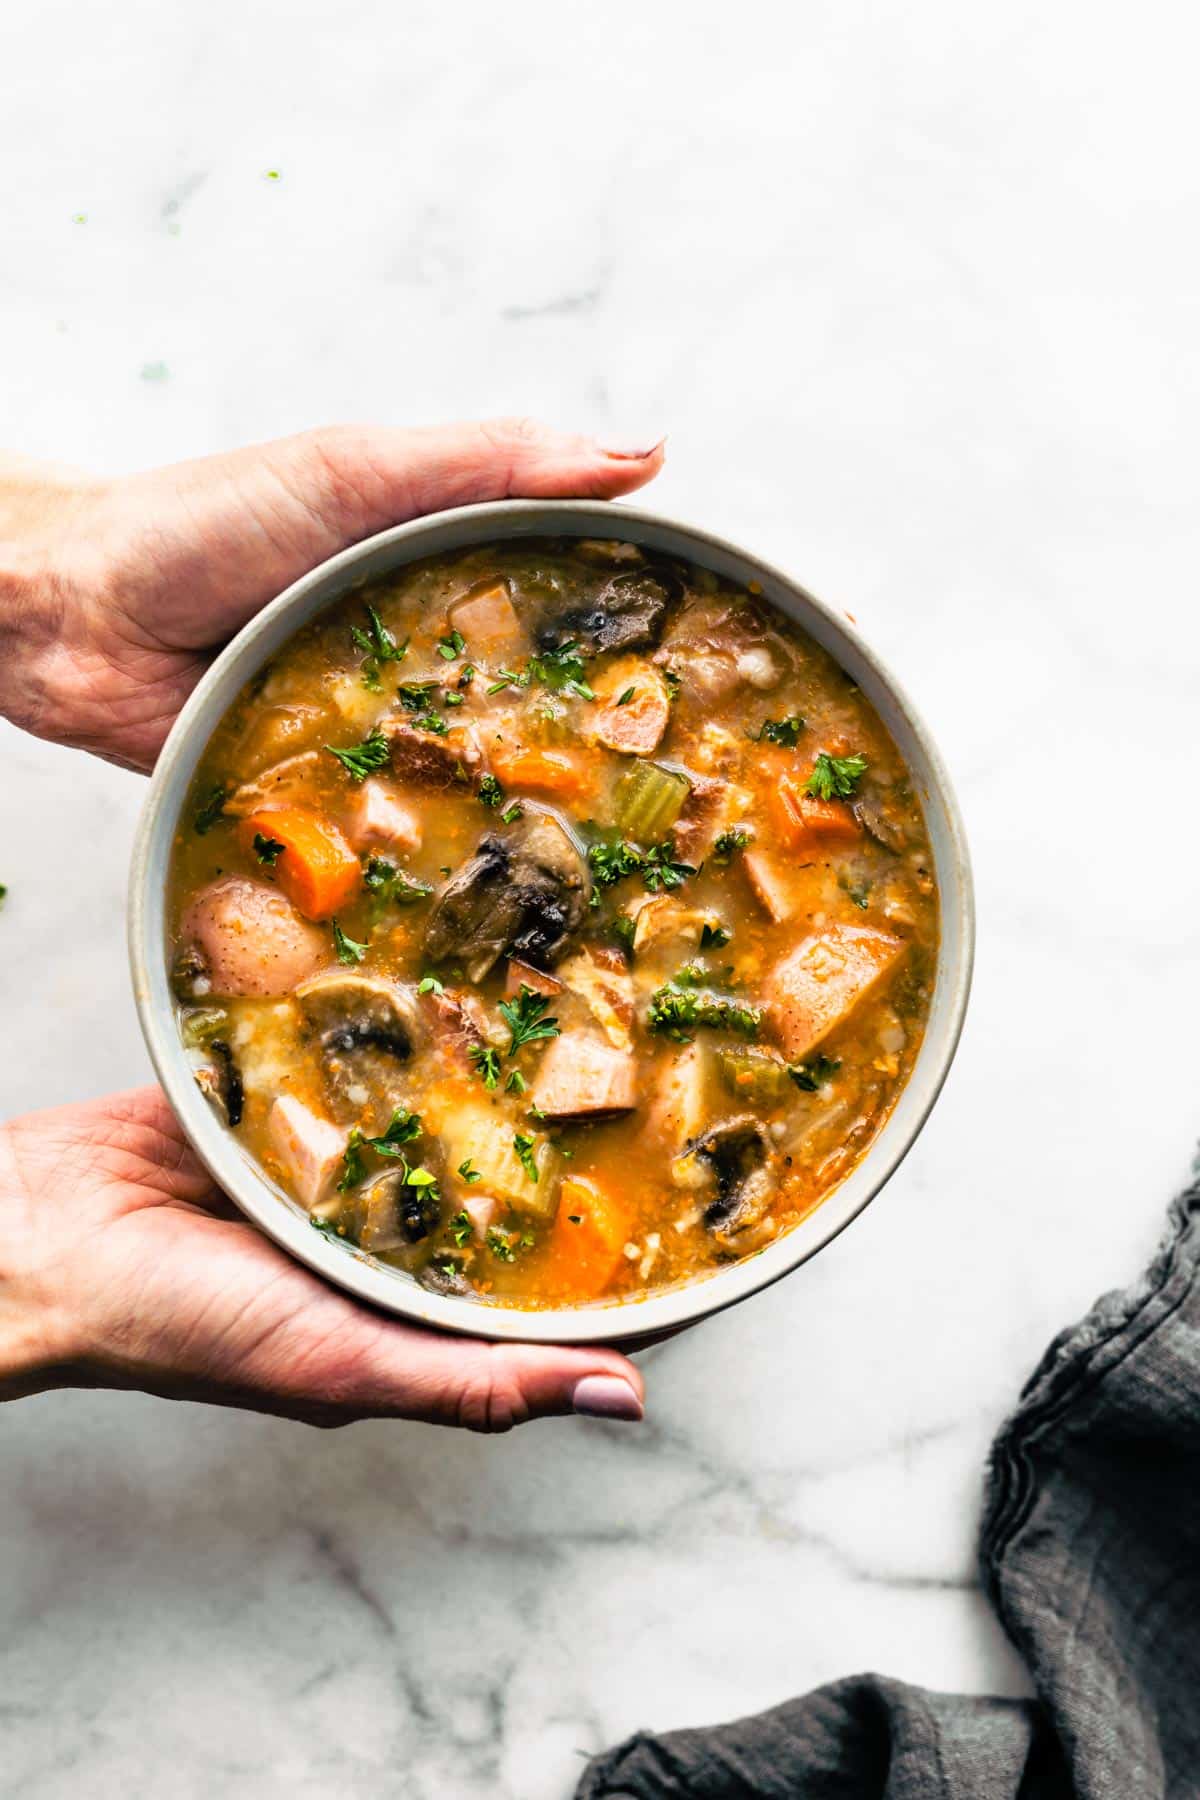 Hands holding a bowl of slow cooker vegetable soup with bacon